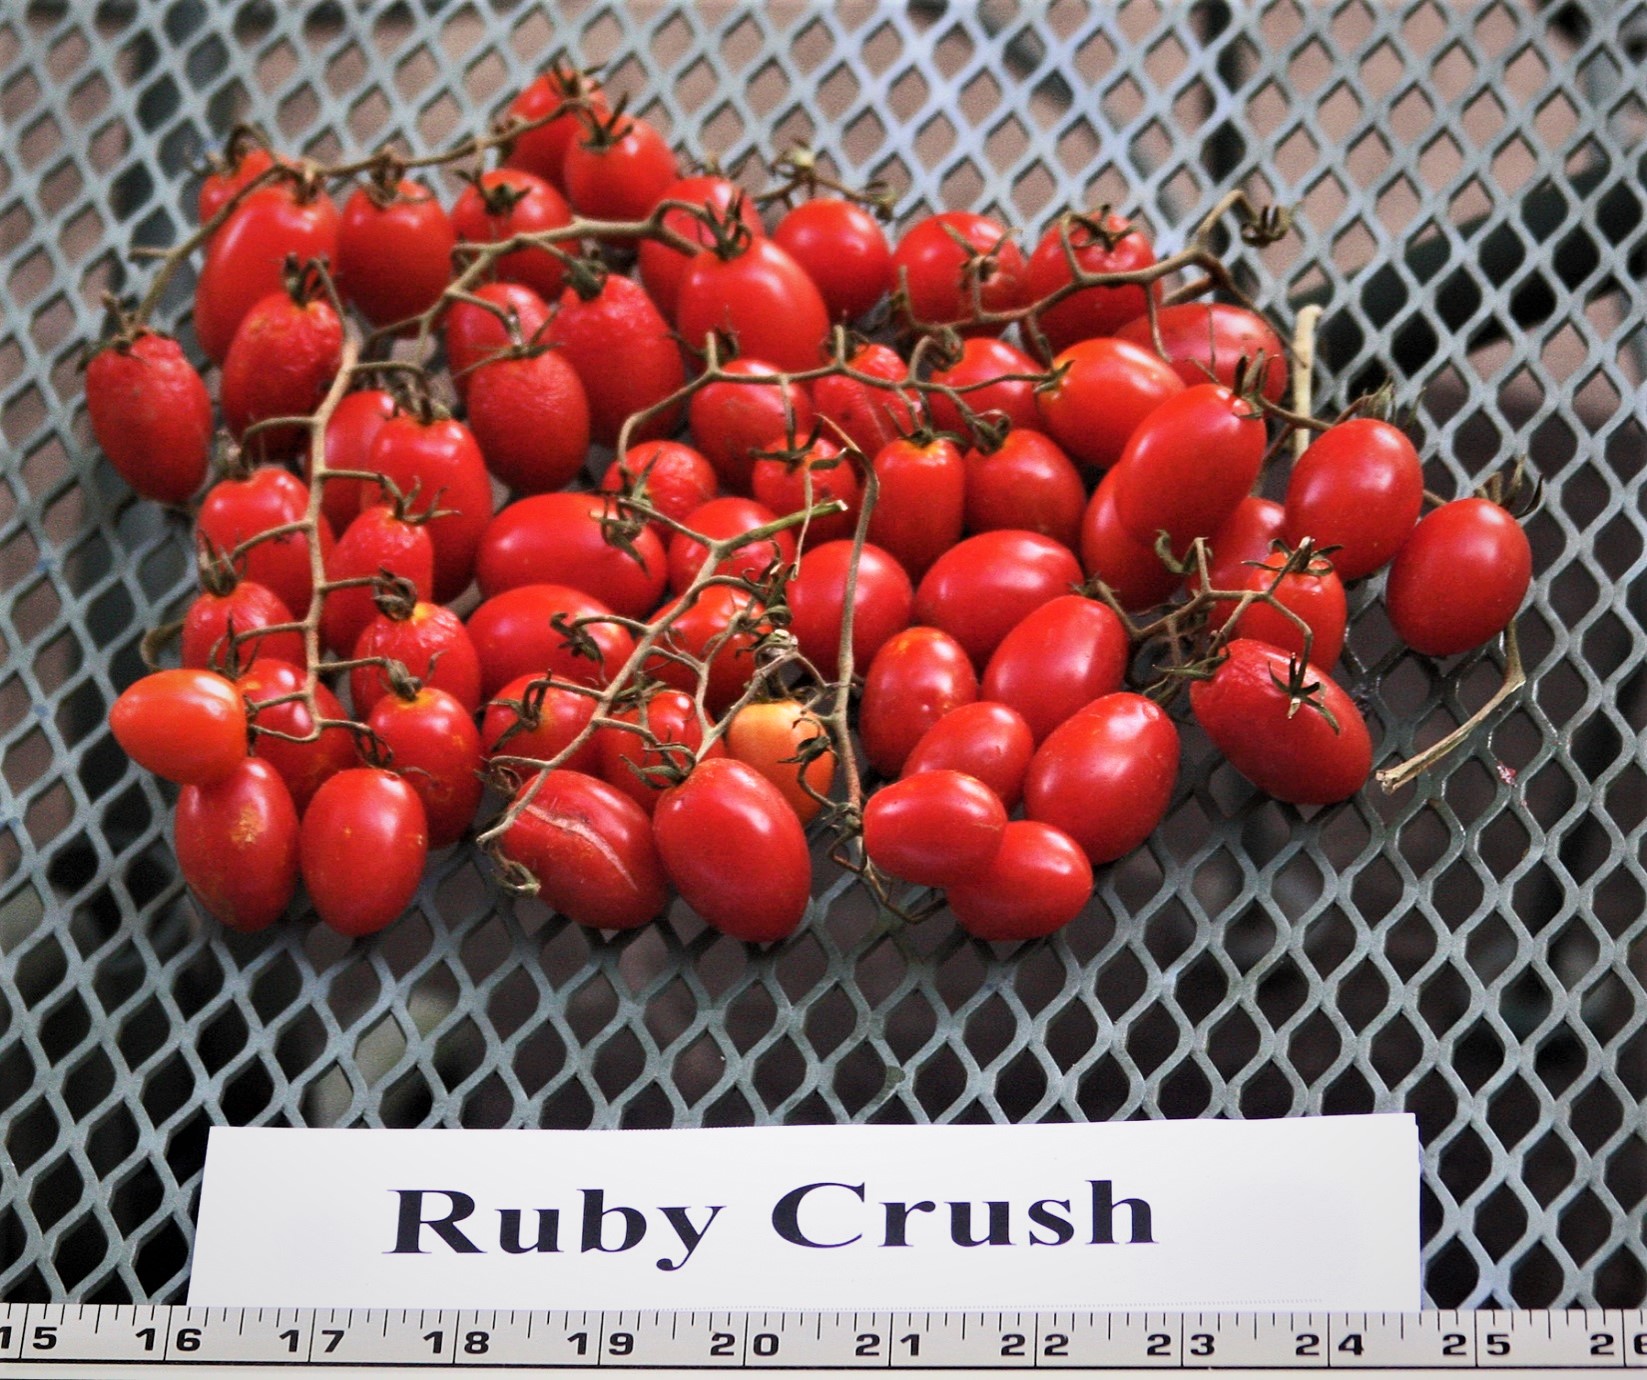 Ruby Crush tomato named Superstar plant - AgriLife Today